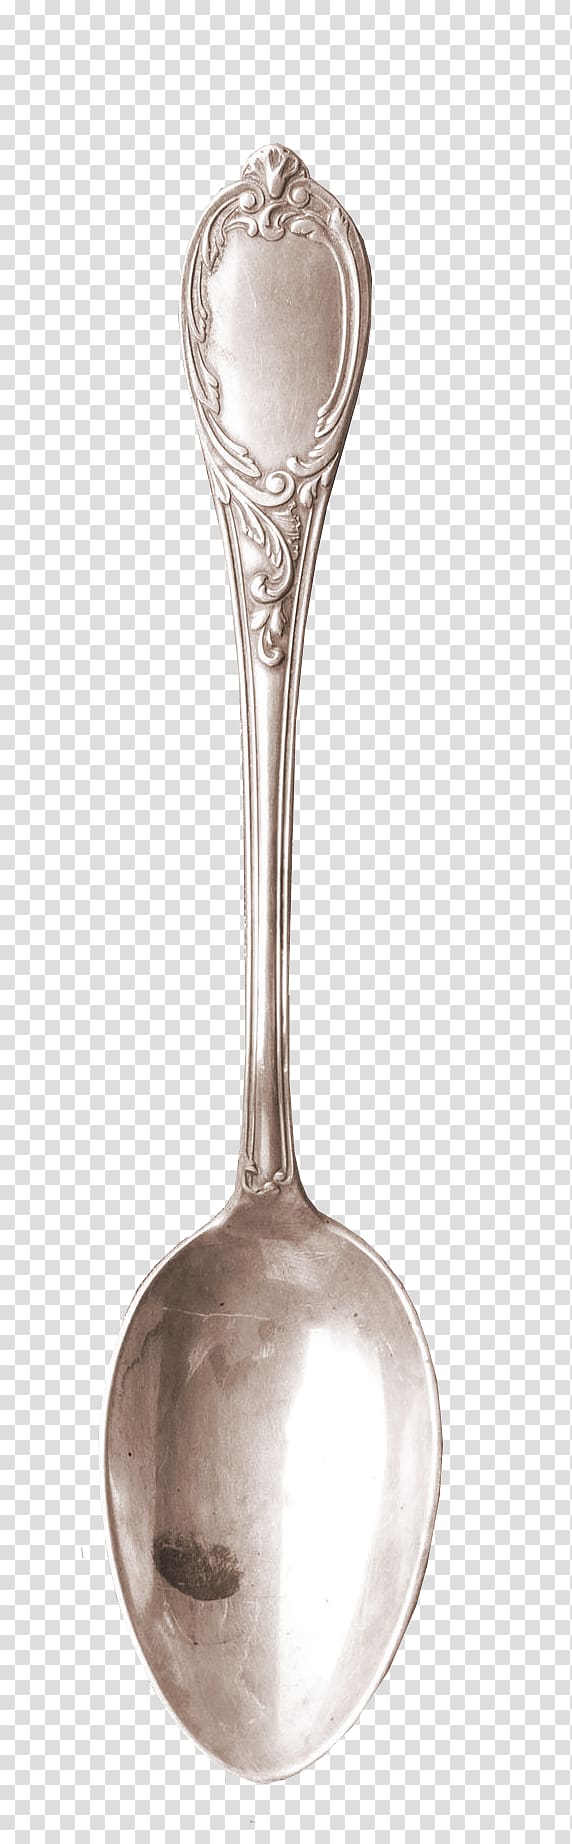 silver spoon, Spoon Fork Ladle, Iron spoon transparent background PNG clipart